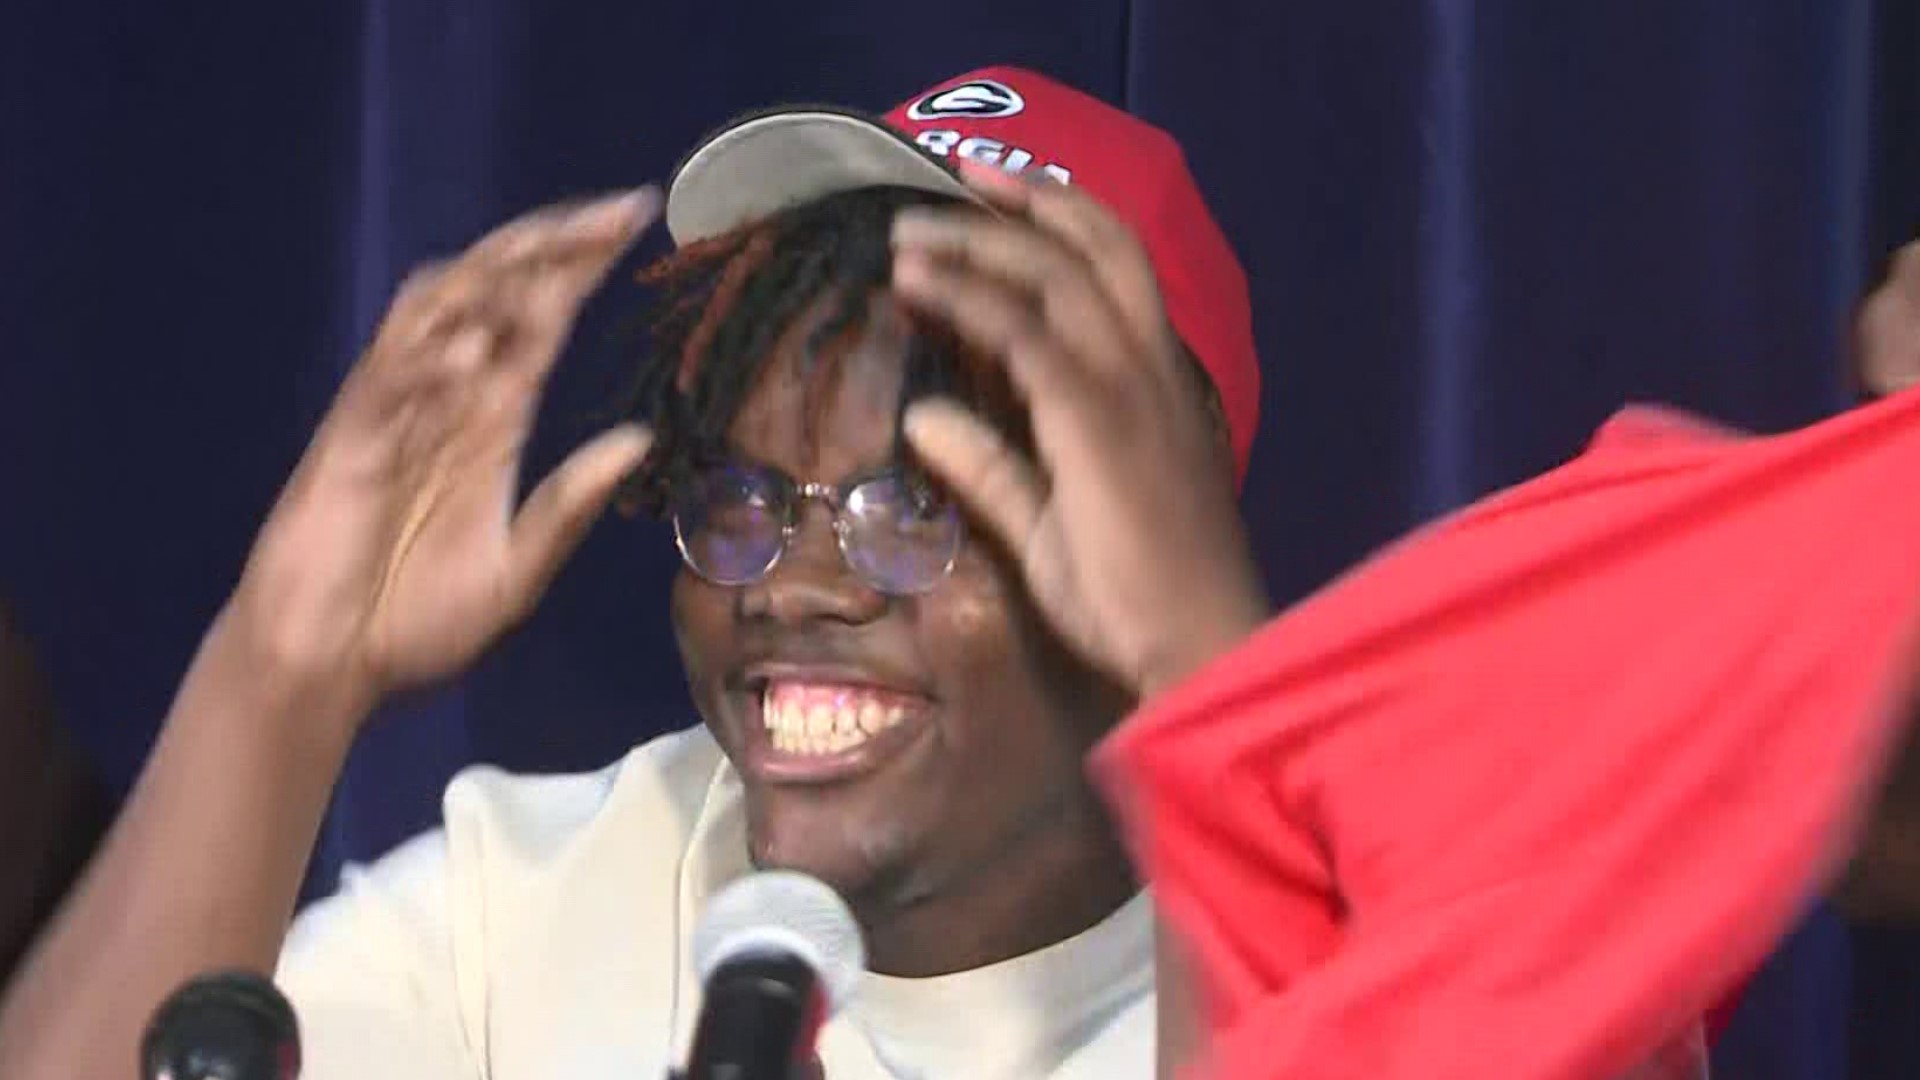 He made the announcement during a National Signing Day ceremony.